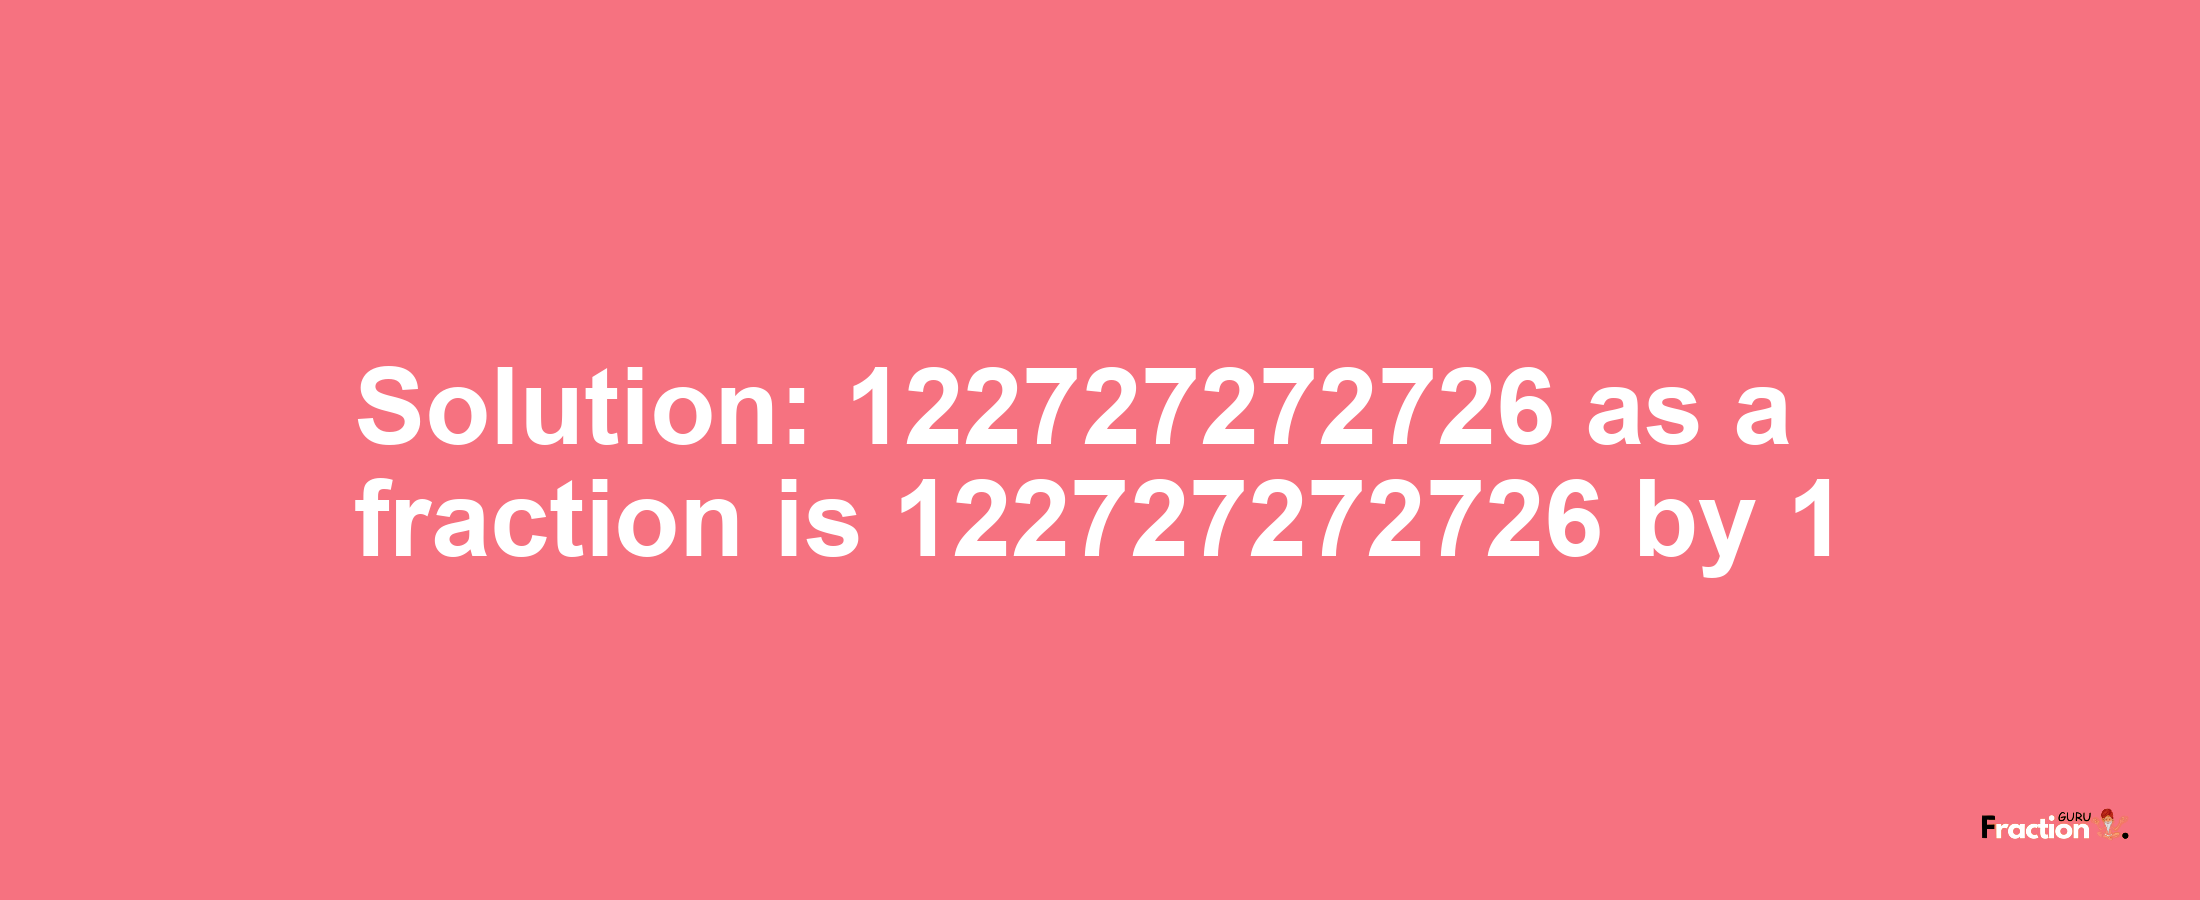 Solution:122727272726 as a fraction is 122727272726/1